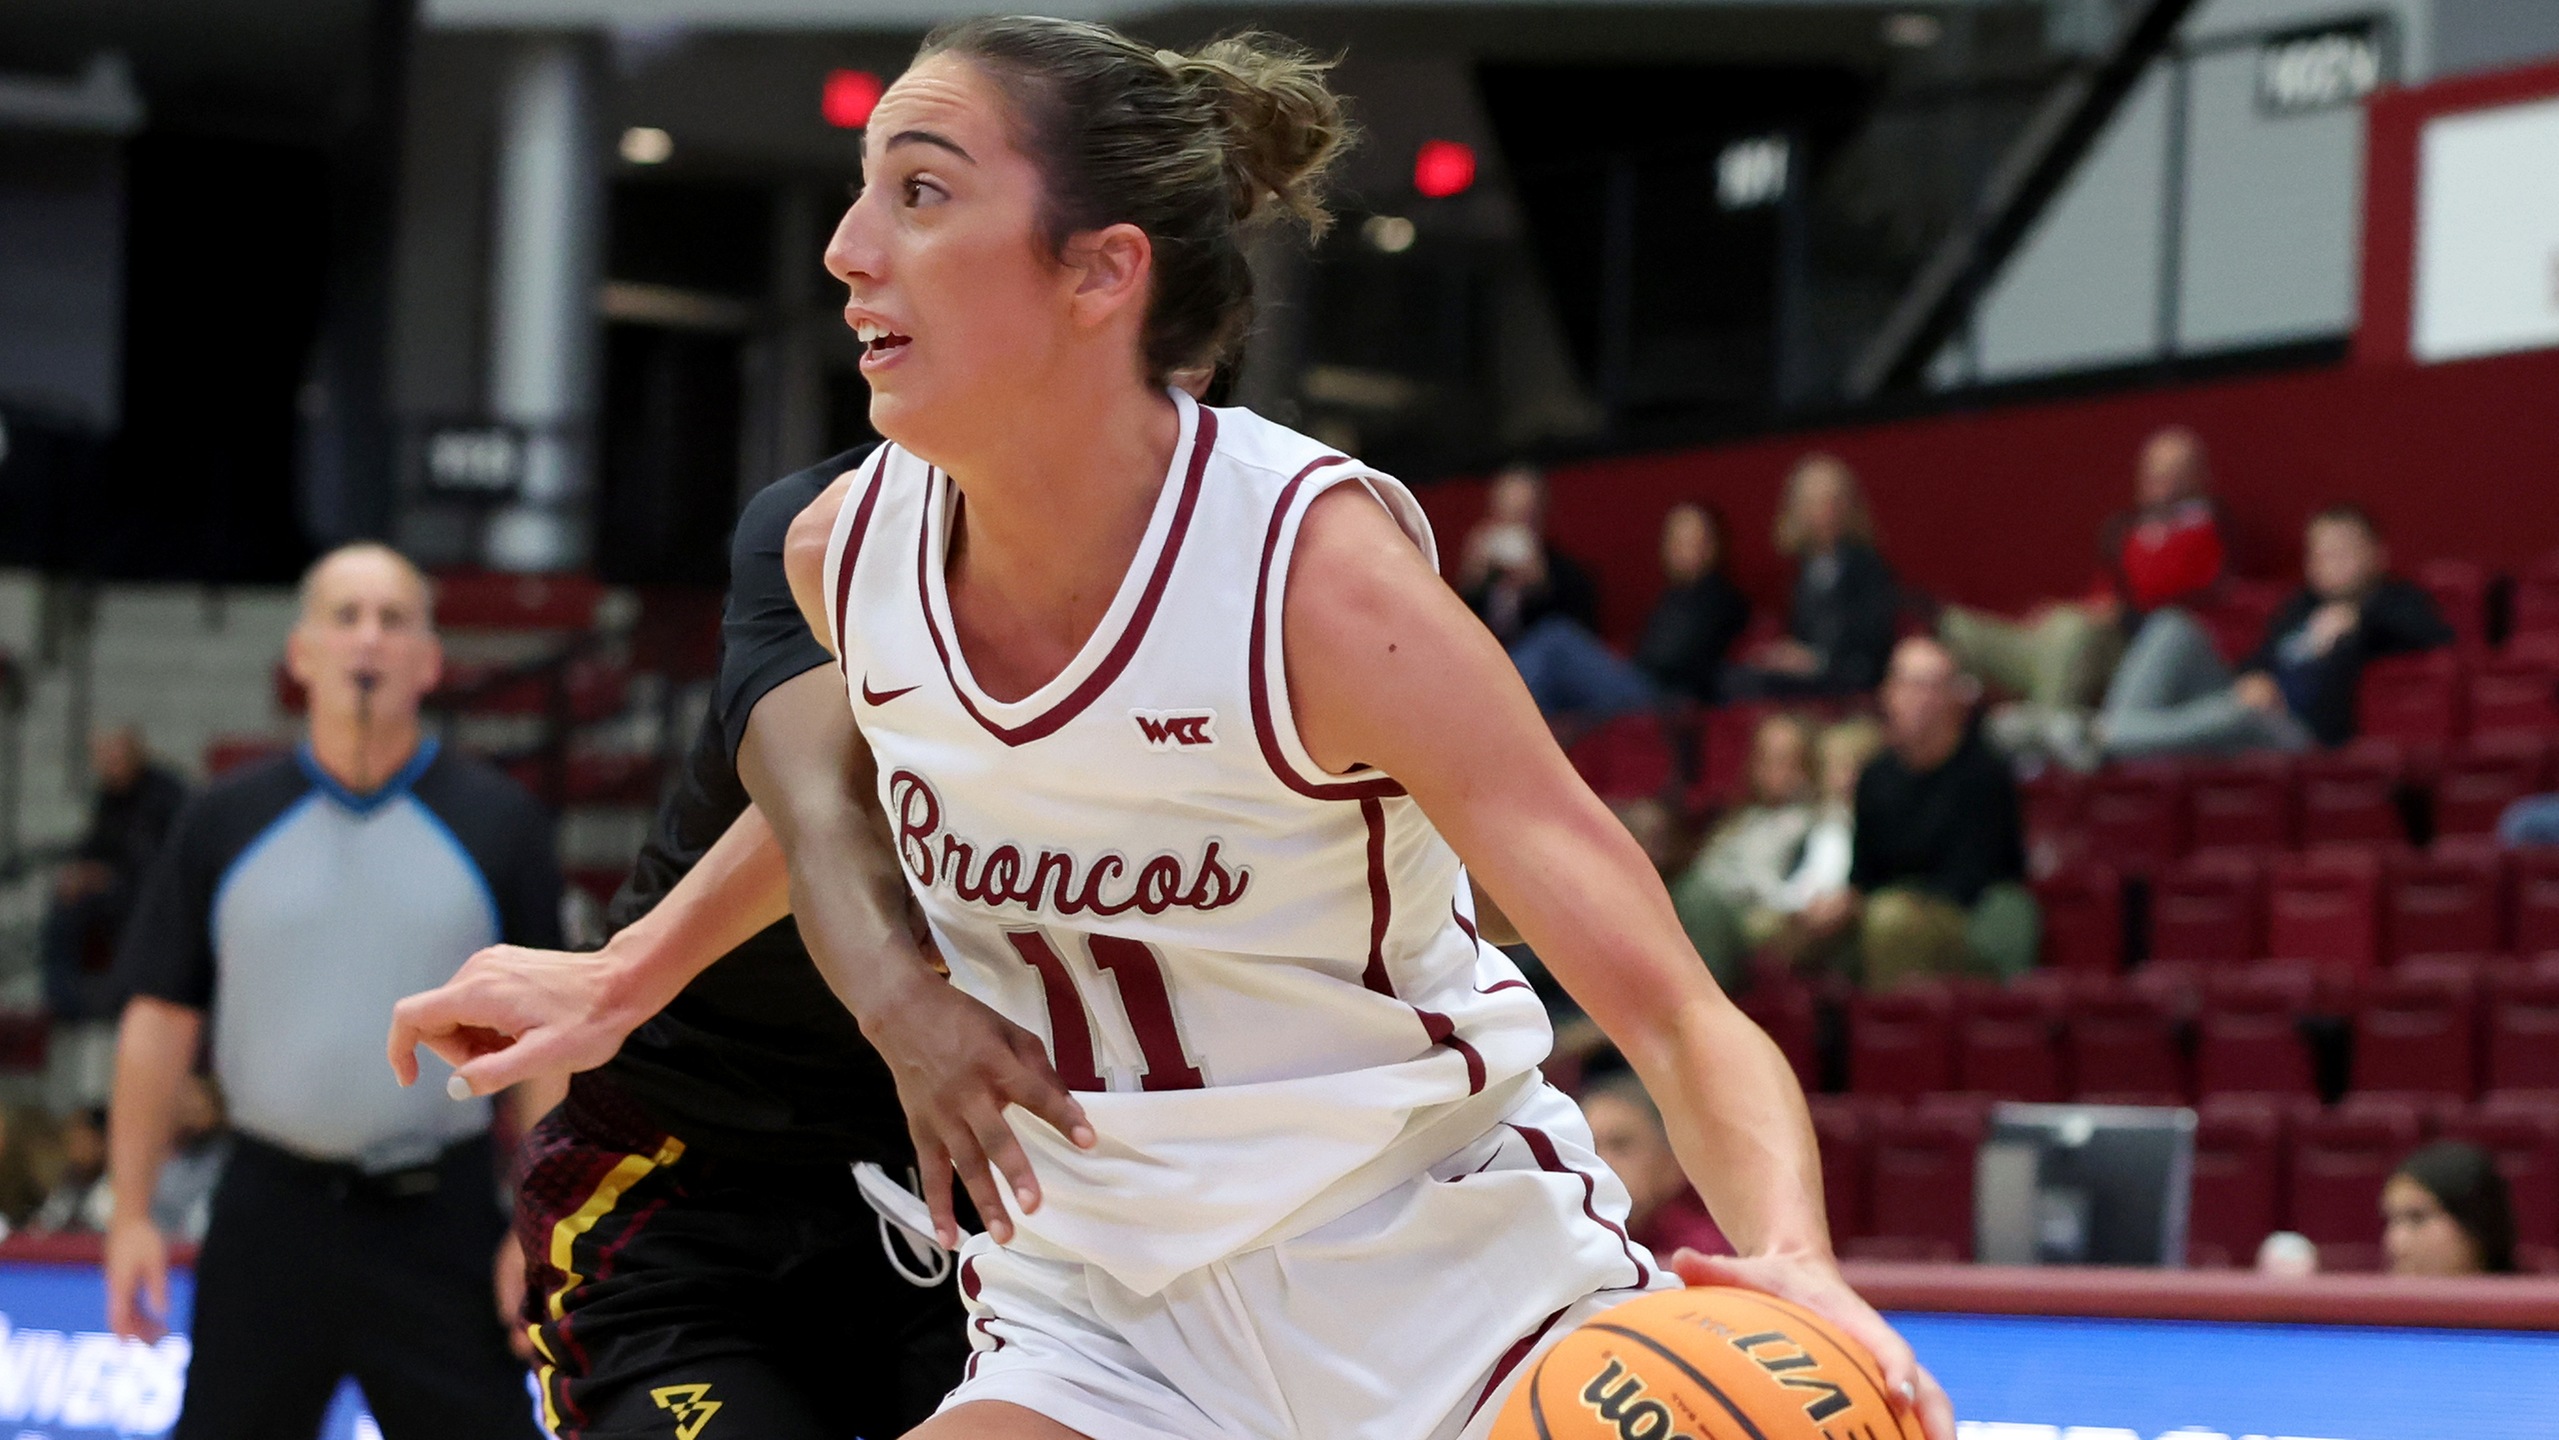 Women's Basketball Sets Records in Dominant Win over Lincoln (Calif.)